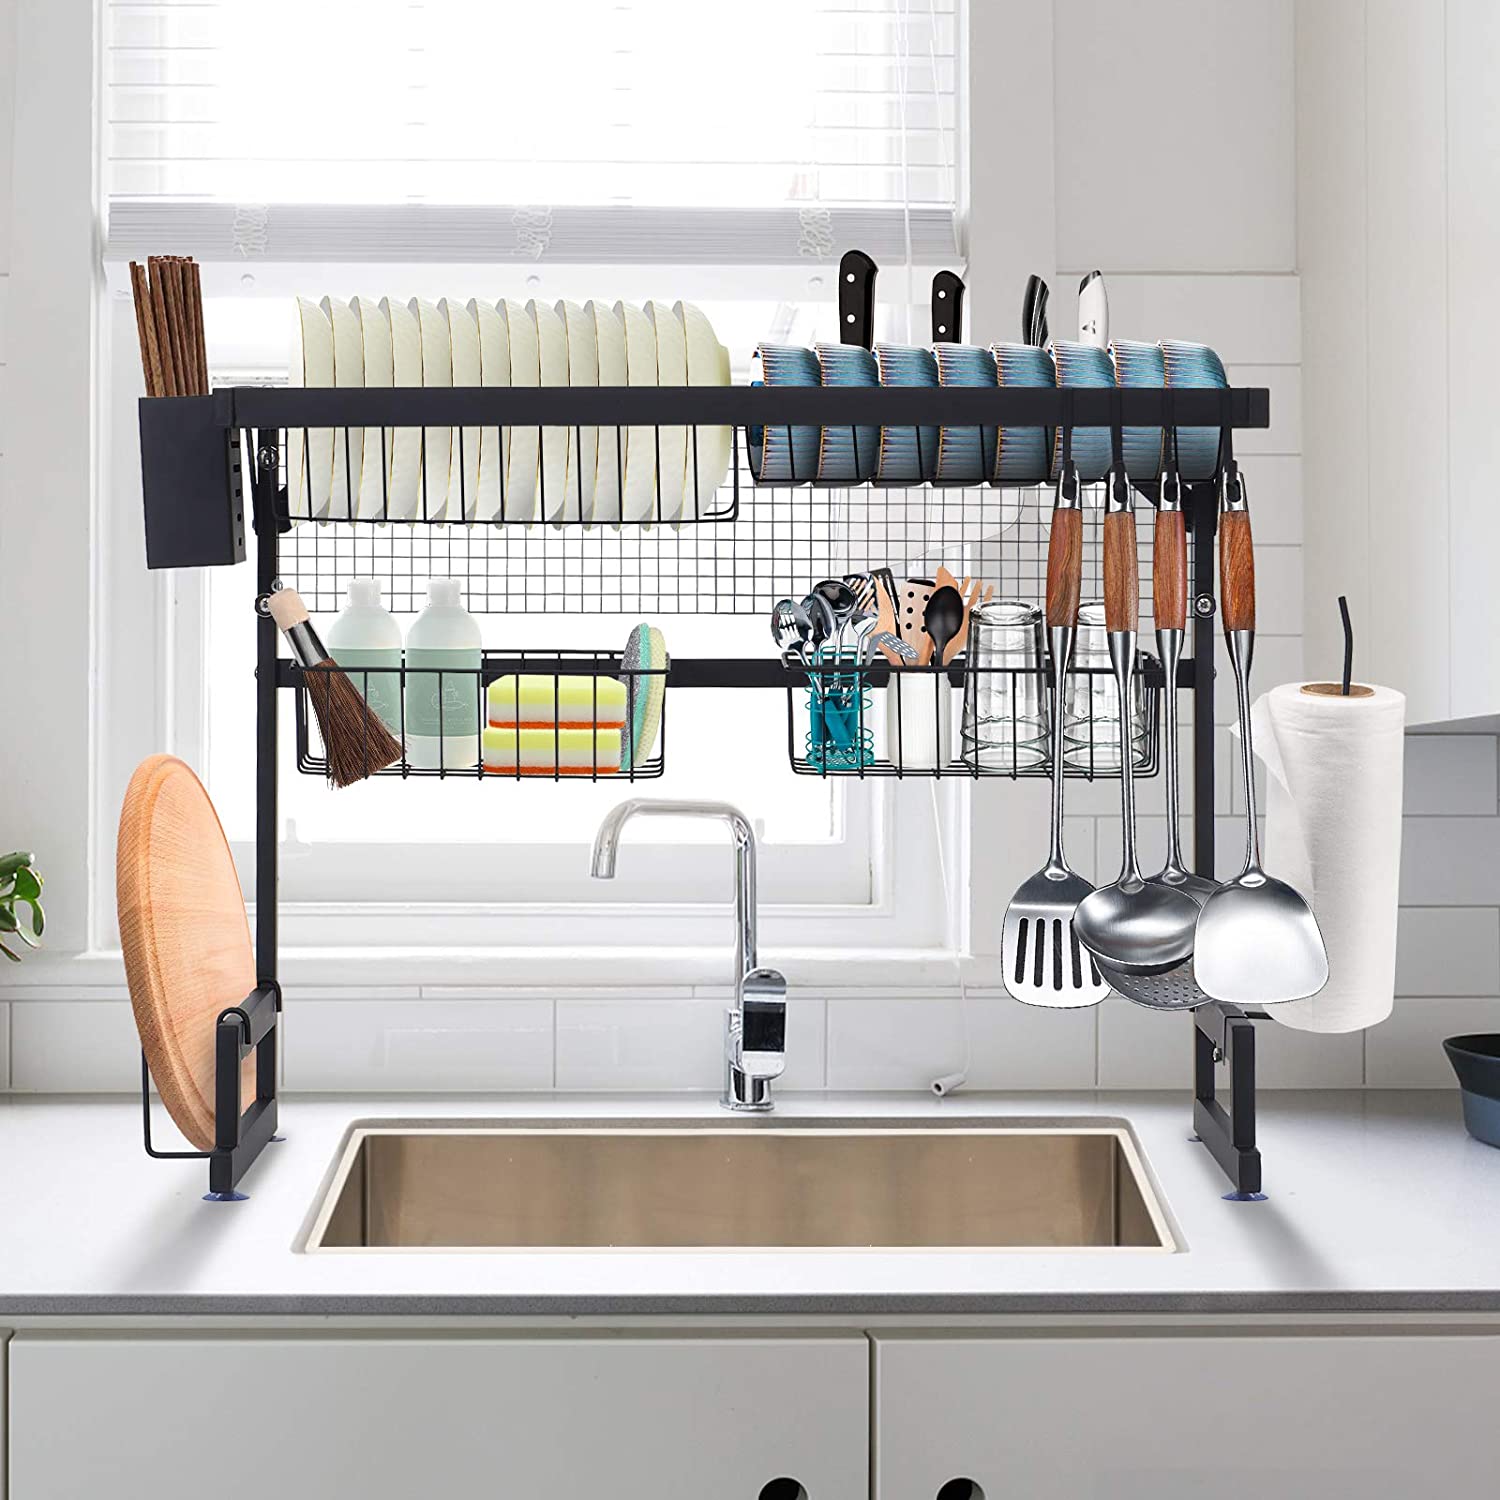 8 Space-Saving Over-the-Sink Organizers for Under $40